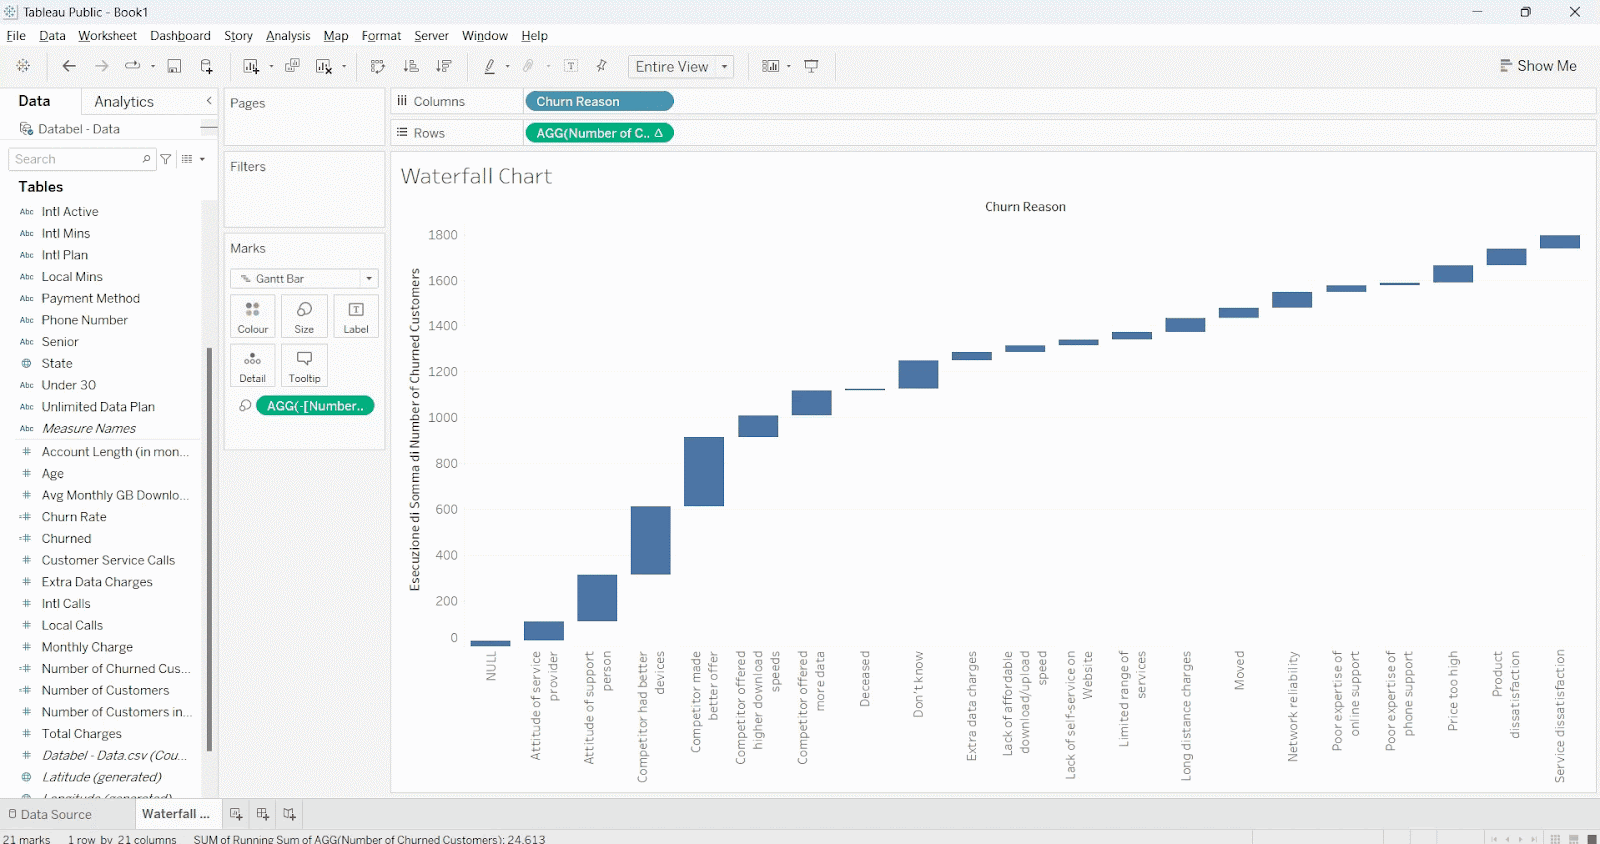 how to add a color gradient to a chart in Tableau